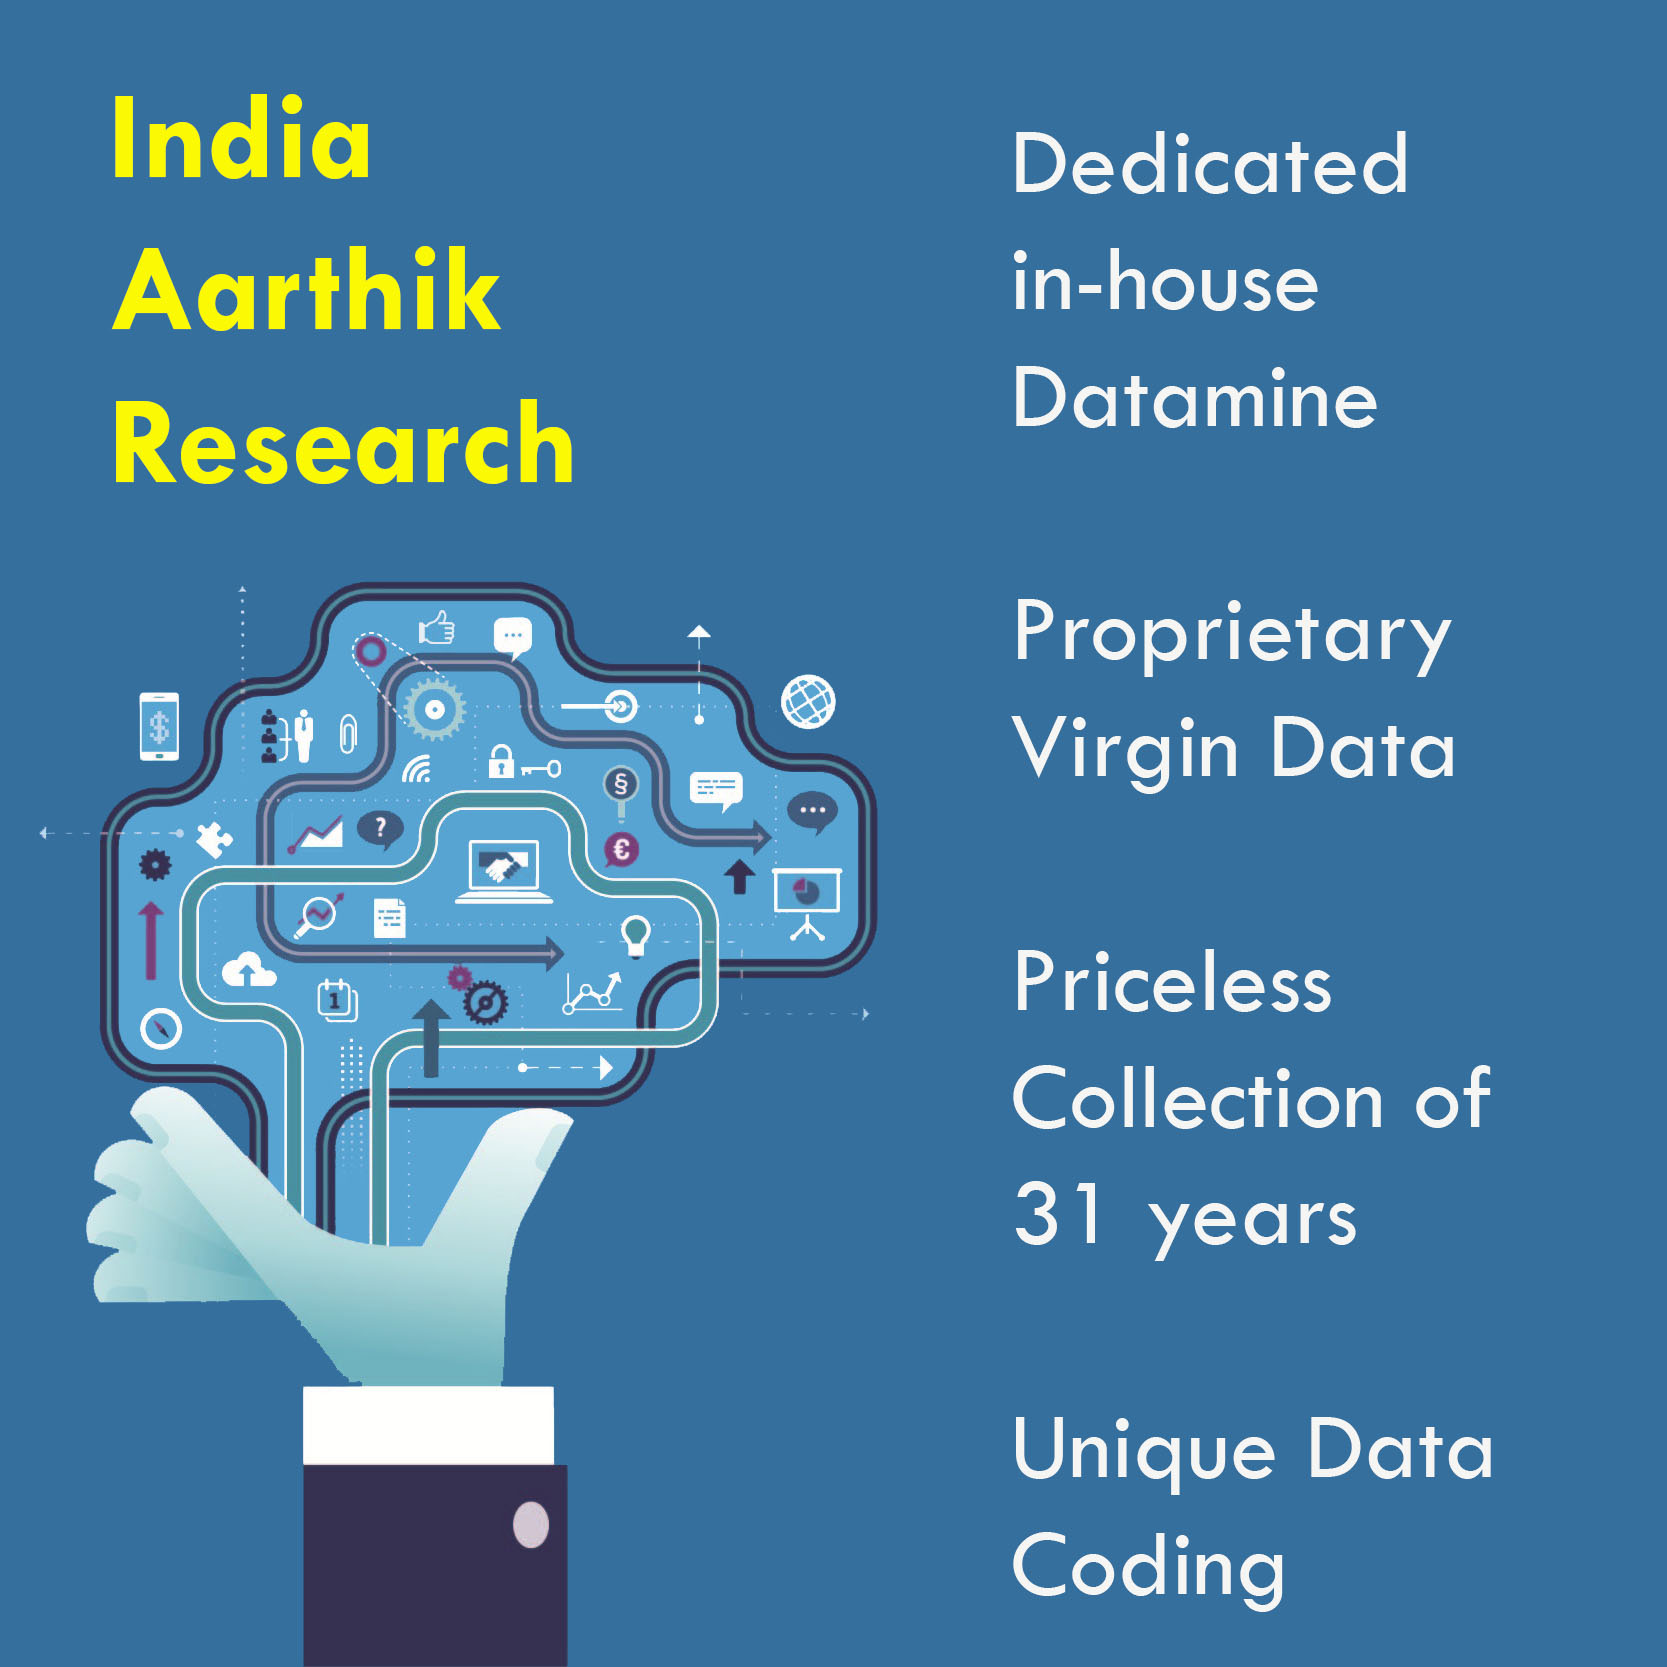 Indian Aarthik Research